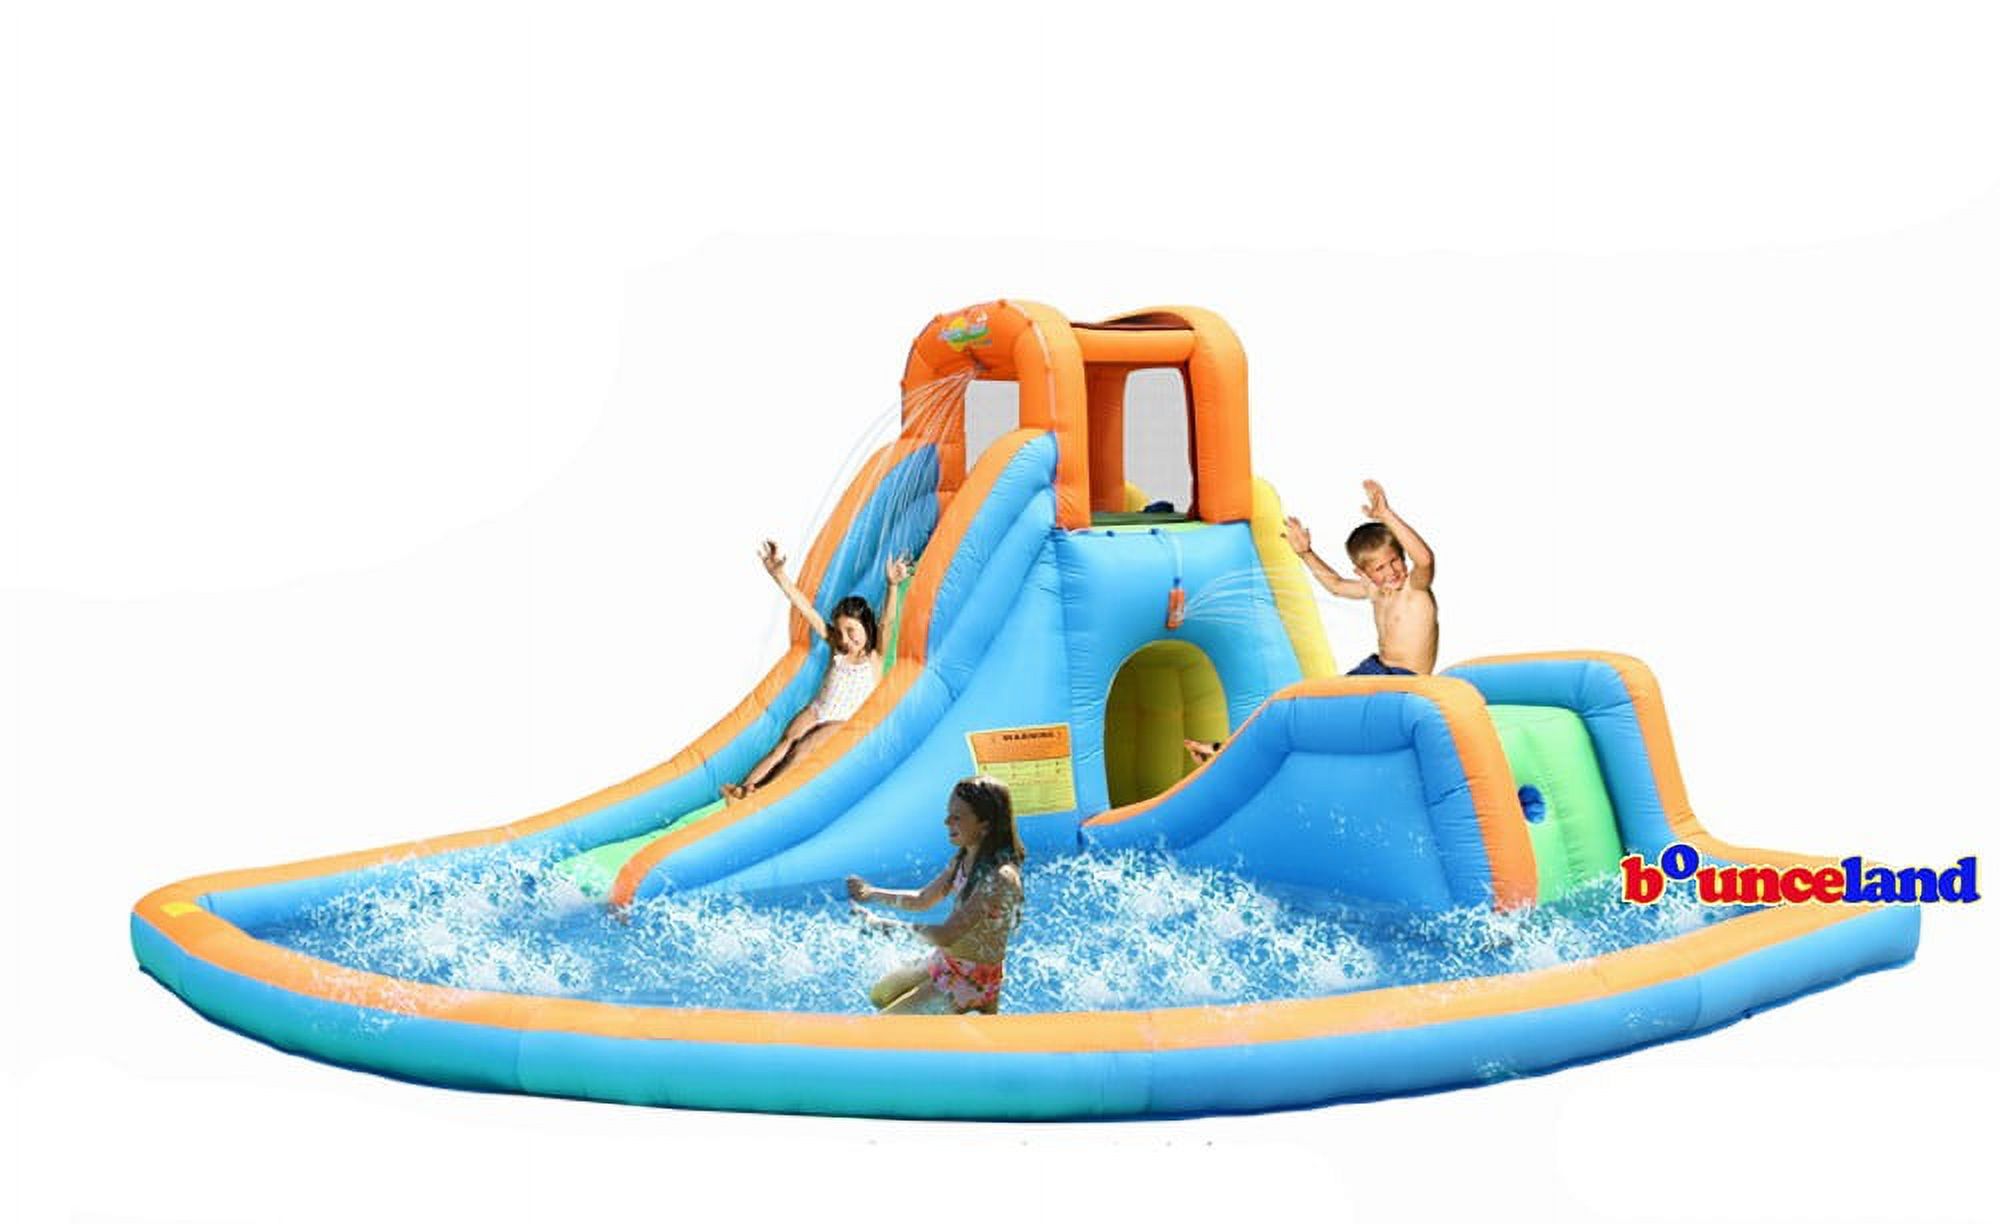 Bounceland Cascade Water Slides with large pool - image 3 of 3